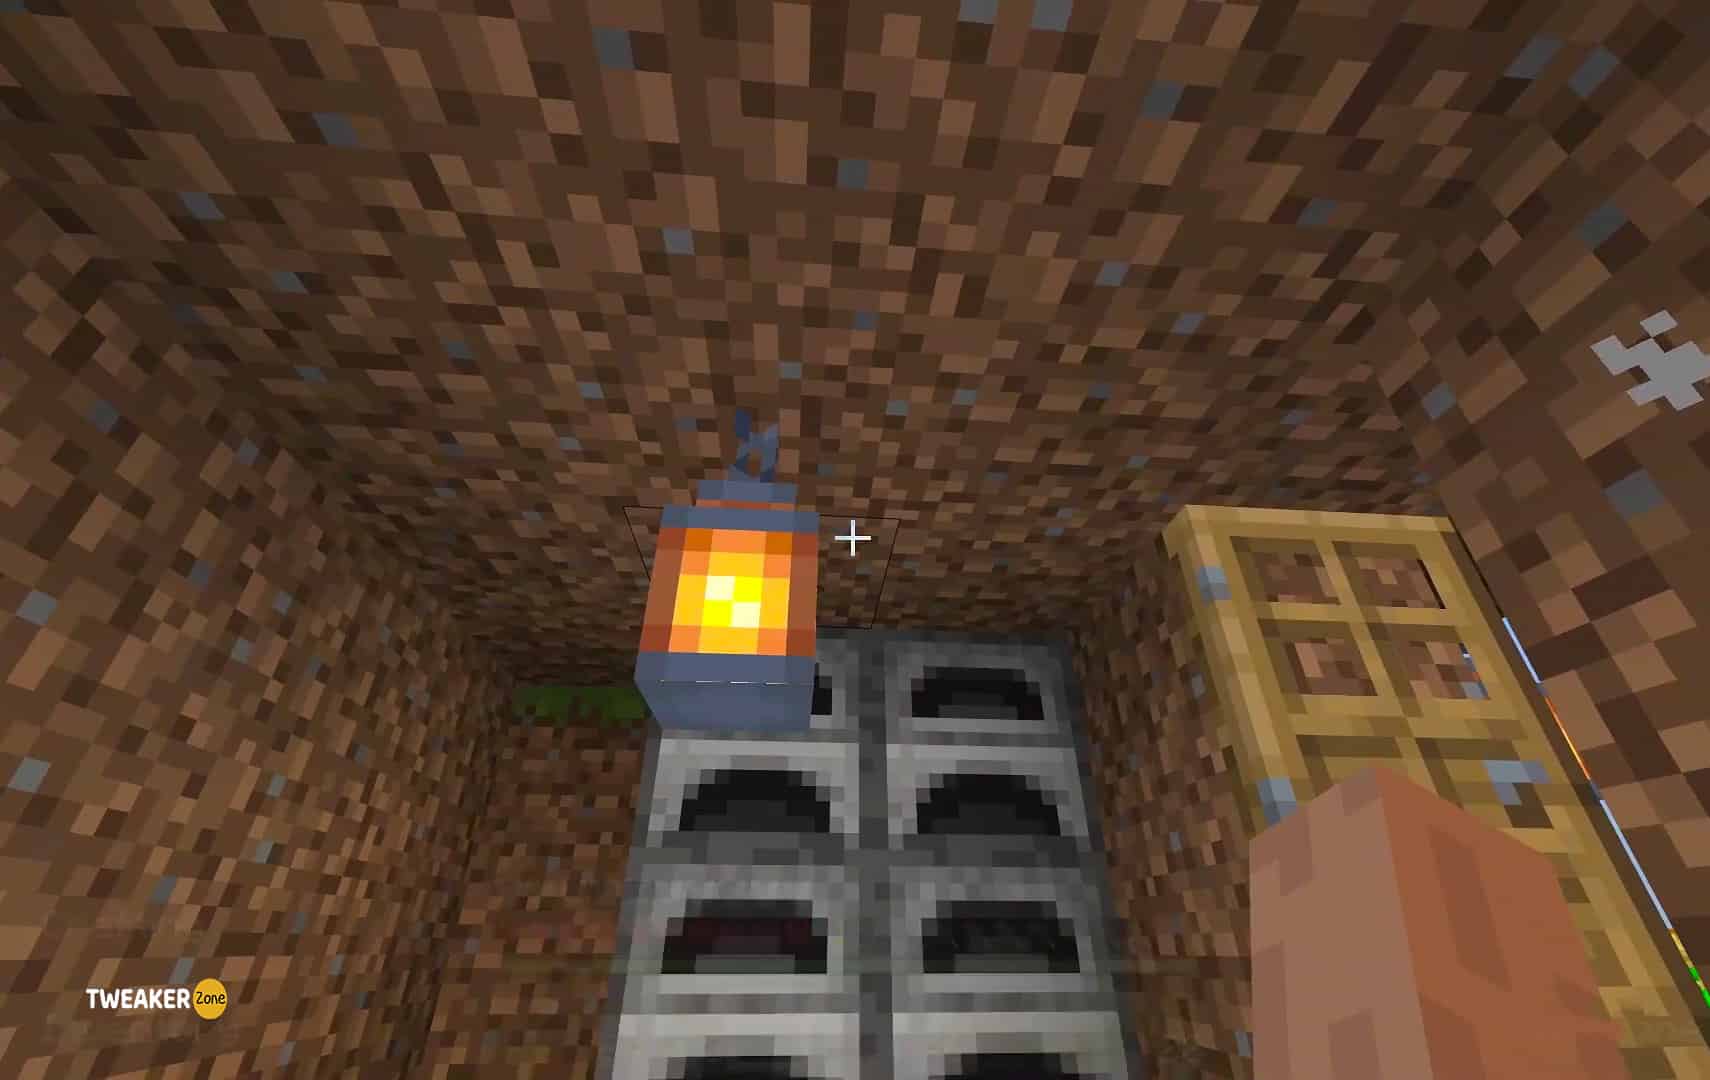 How Can You Find Lanterns in Minecraft